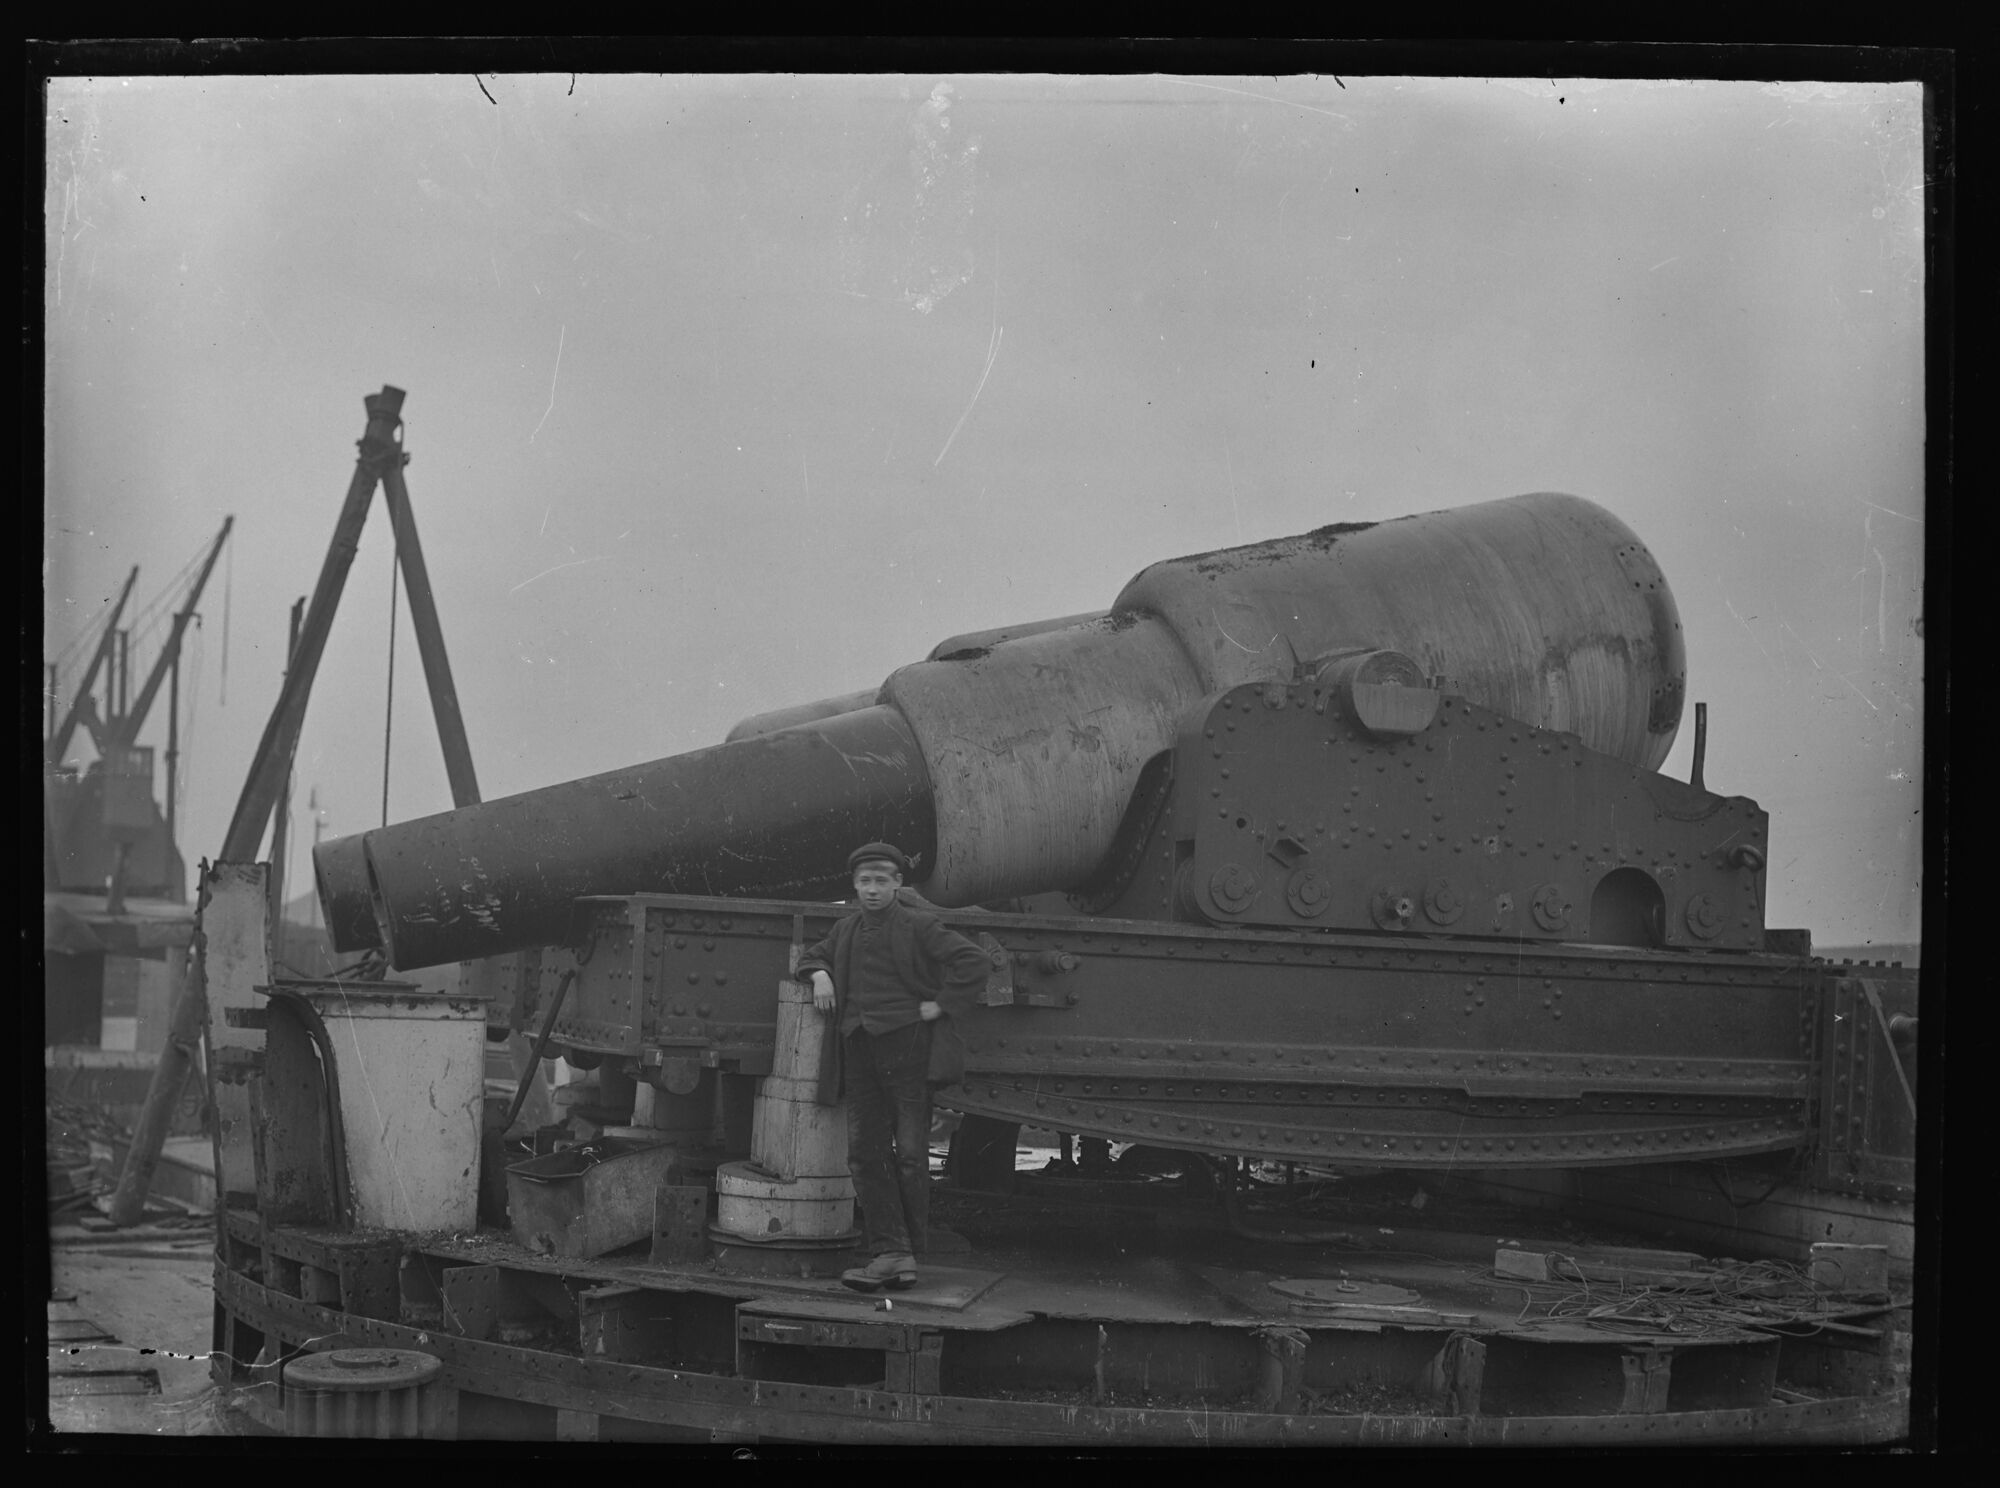 Portrait of child with gun on HMS Dreadnought, Barrow-in-Furness